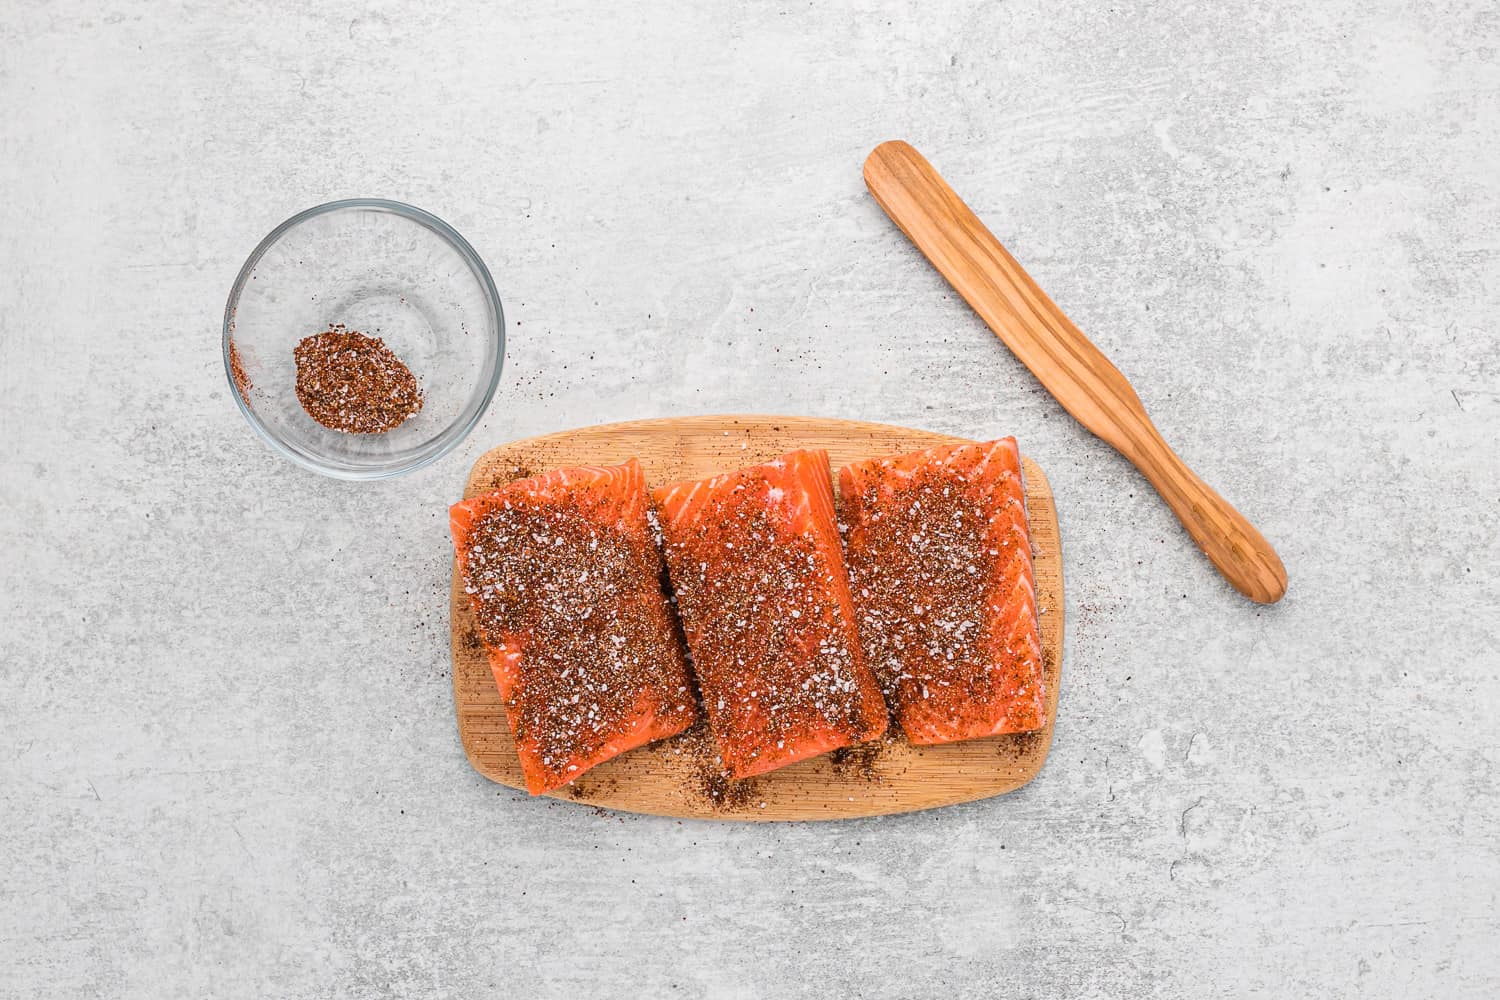 Salmon fillets with seasoning.